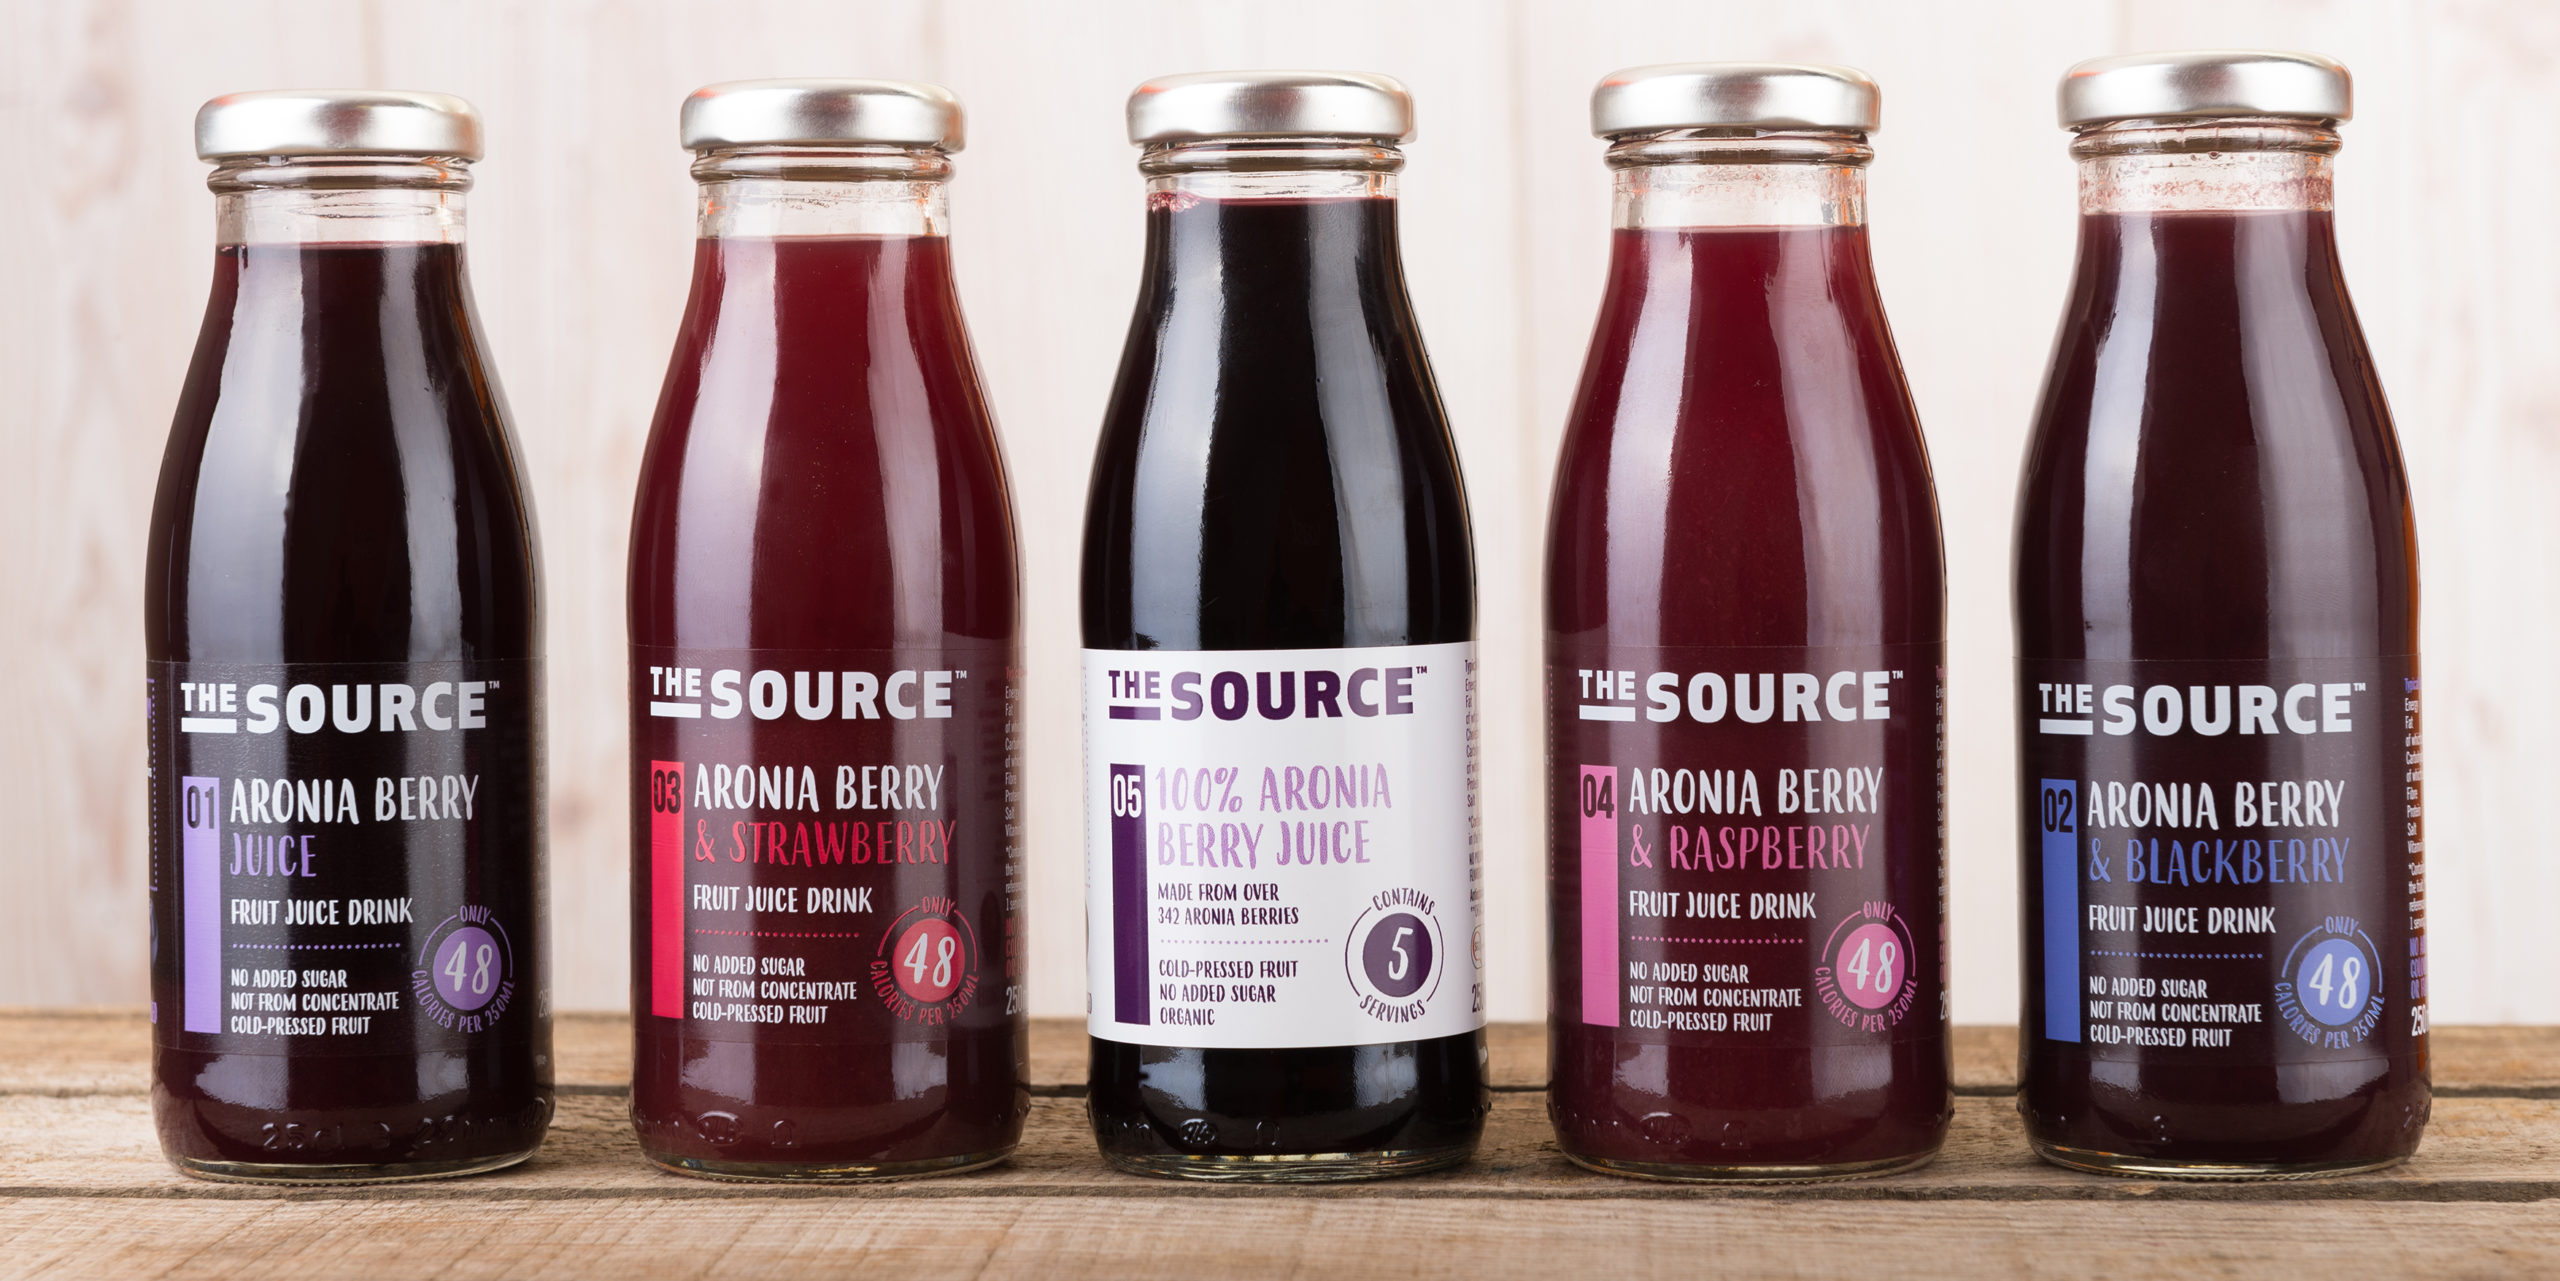 Aronia Berry Drink branding by Toast Food